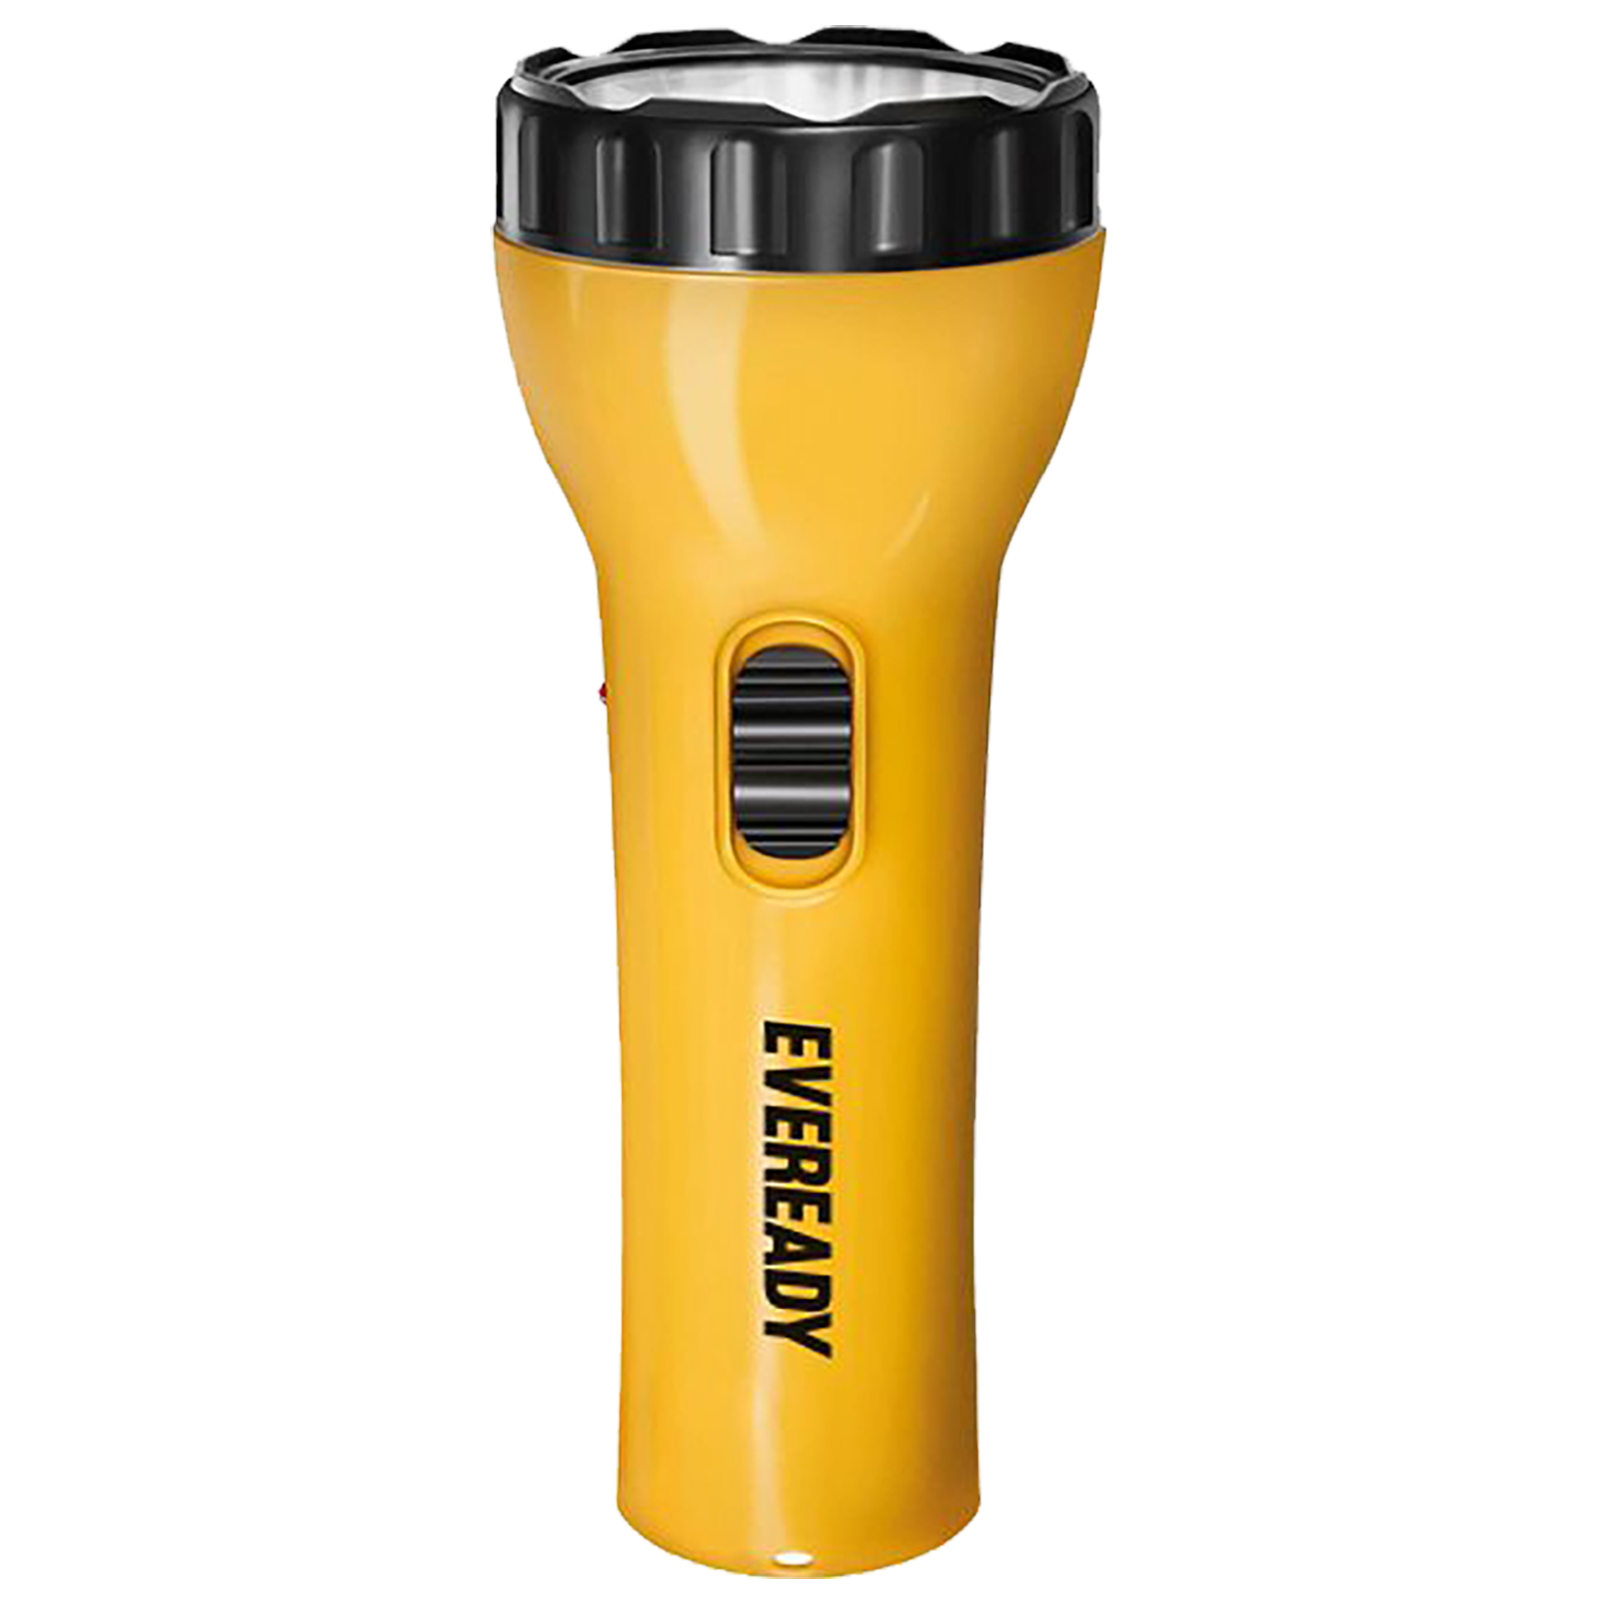 Eveready Sunny 0.5 Watts LED Torch (60 Lumens, Power On/Off Indicator, EVE DL92, Yellow/Black)_1